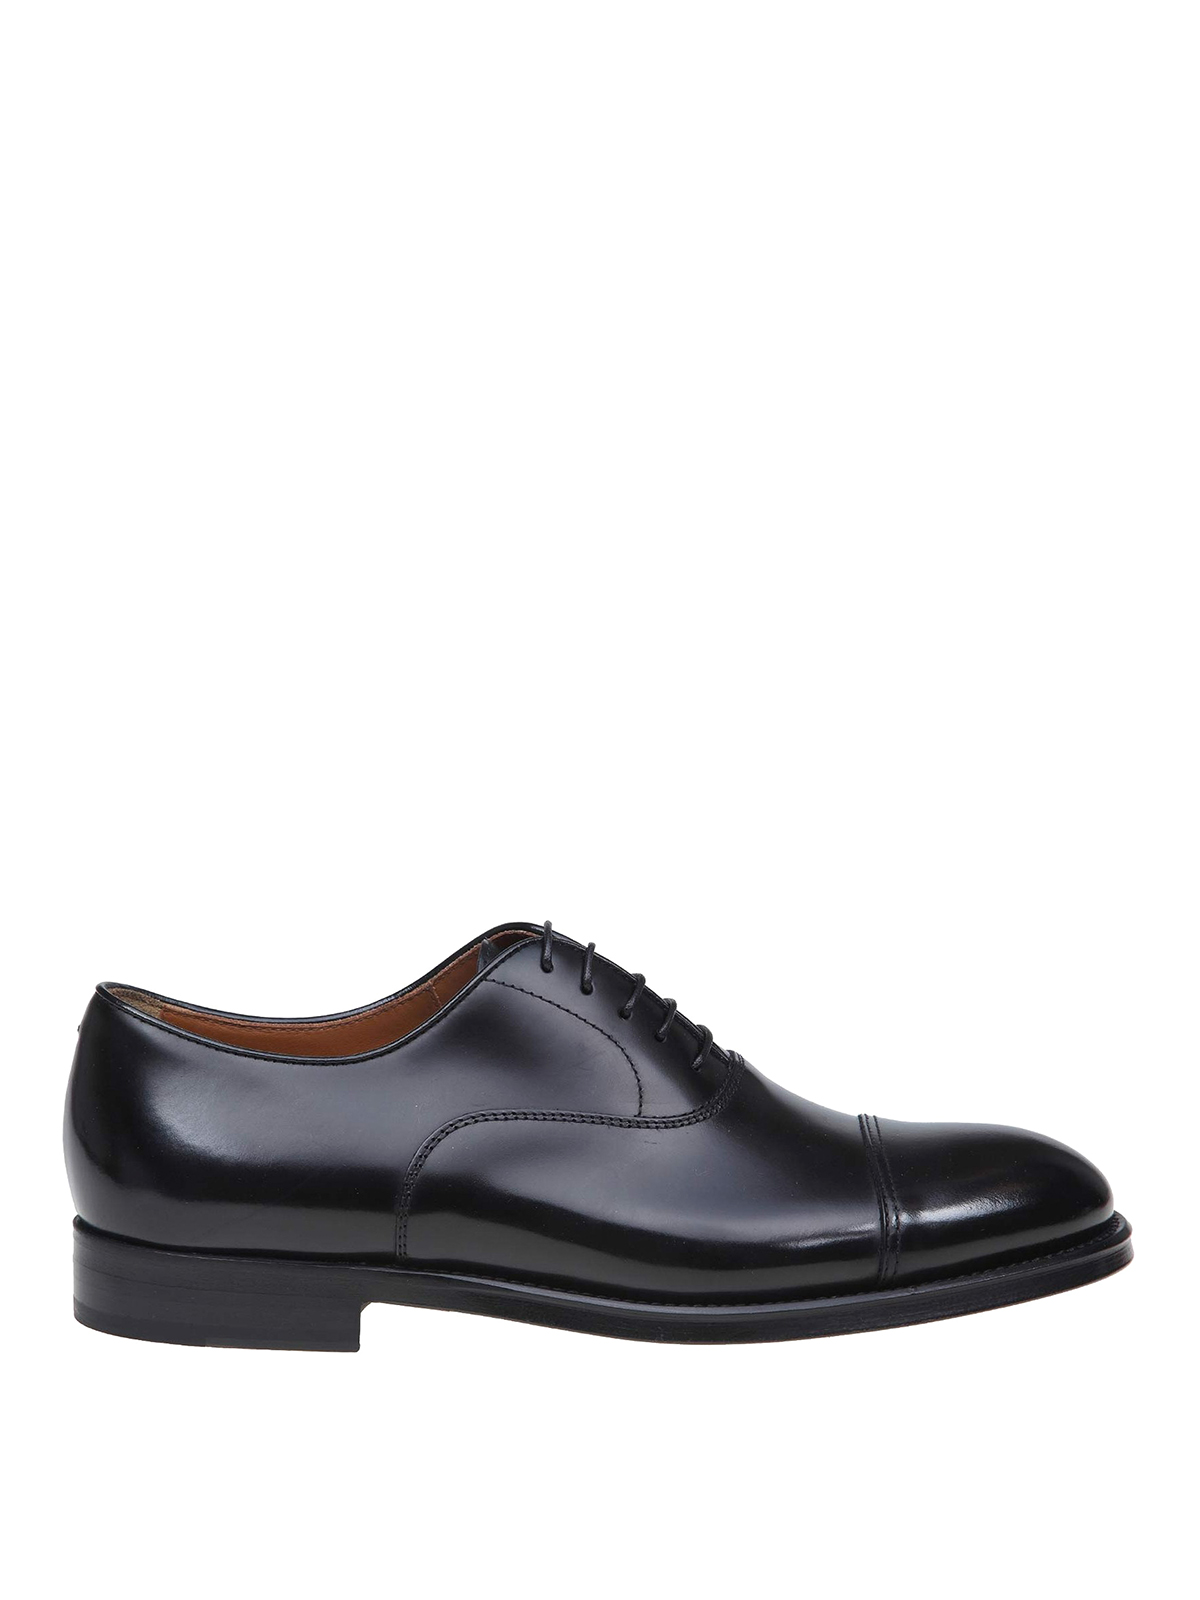 Doucal's Doucals Black Oxford Lace Up